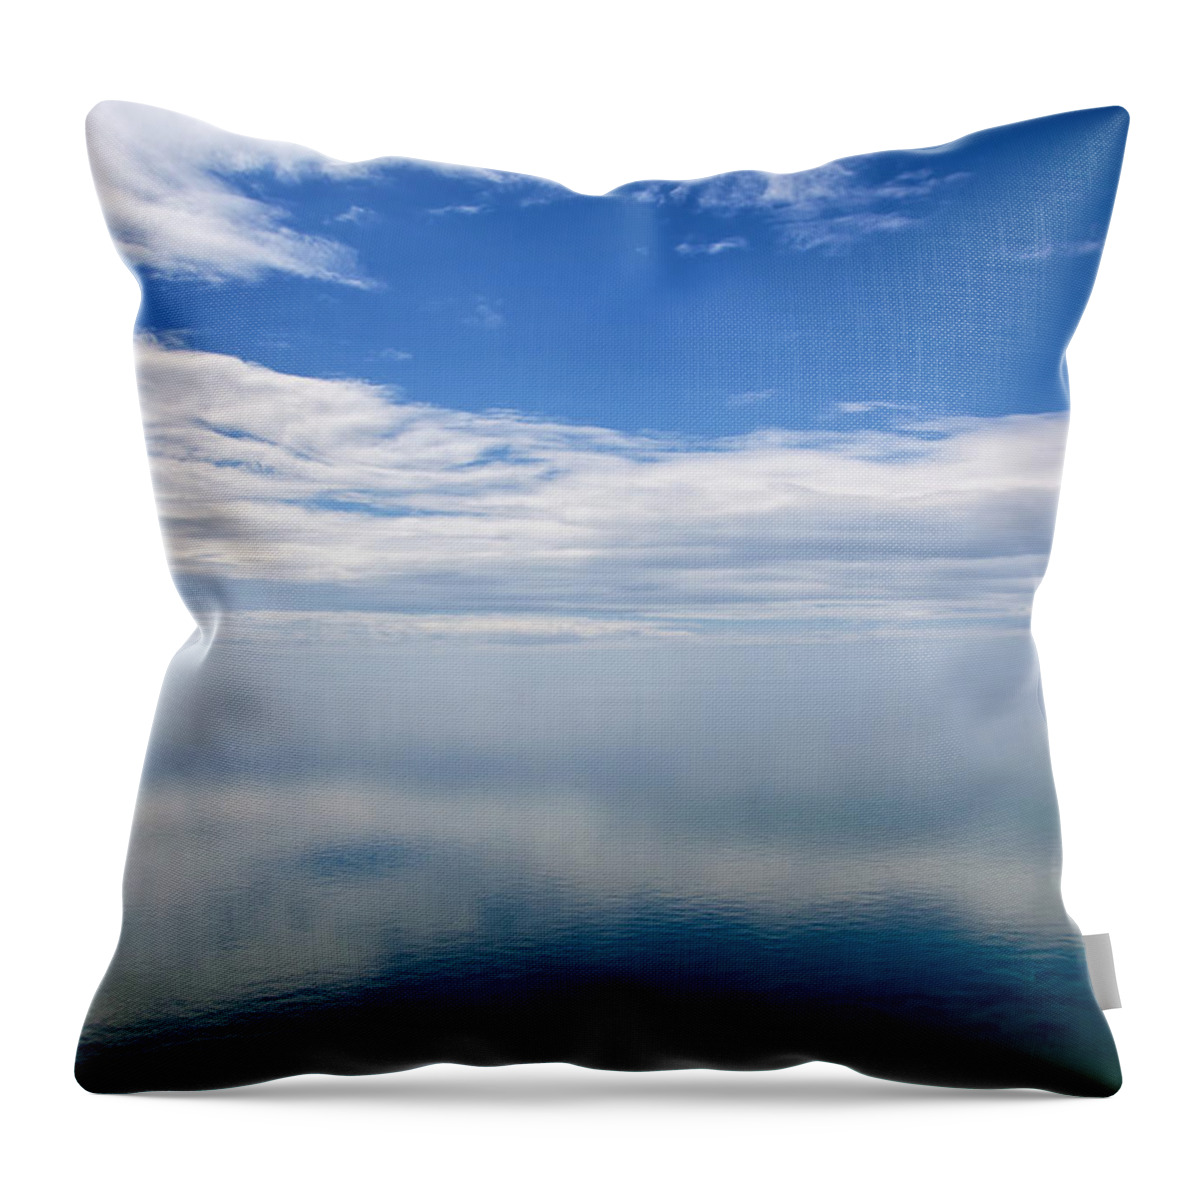 Lake Michigan Throw Pillow featuring the photograph Lake Michigan's Lost Horizon by Mary Lee Dereske